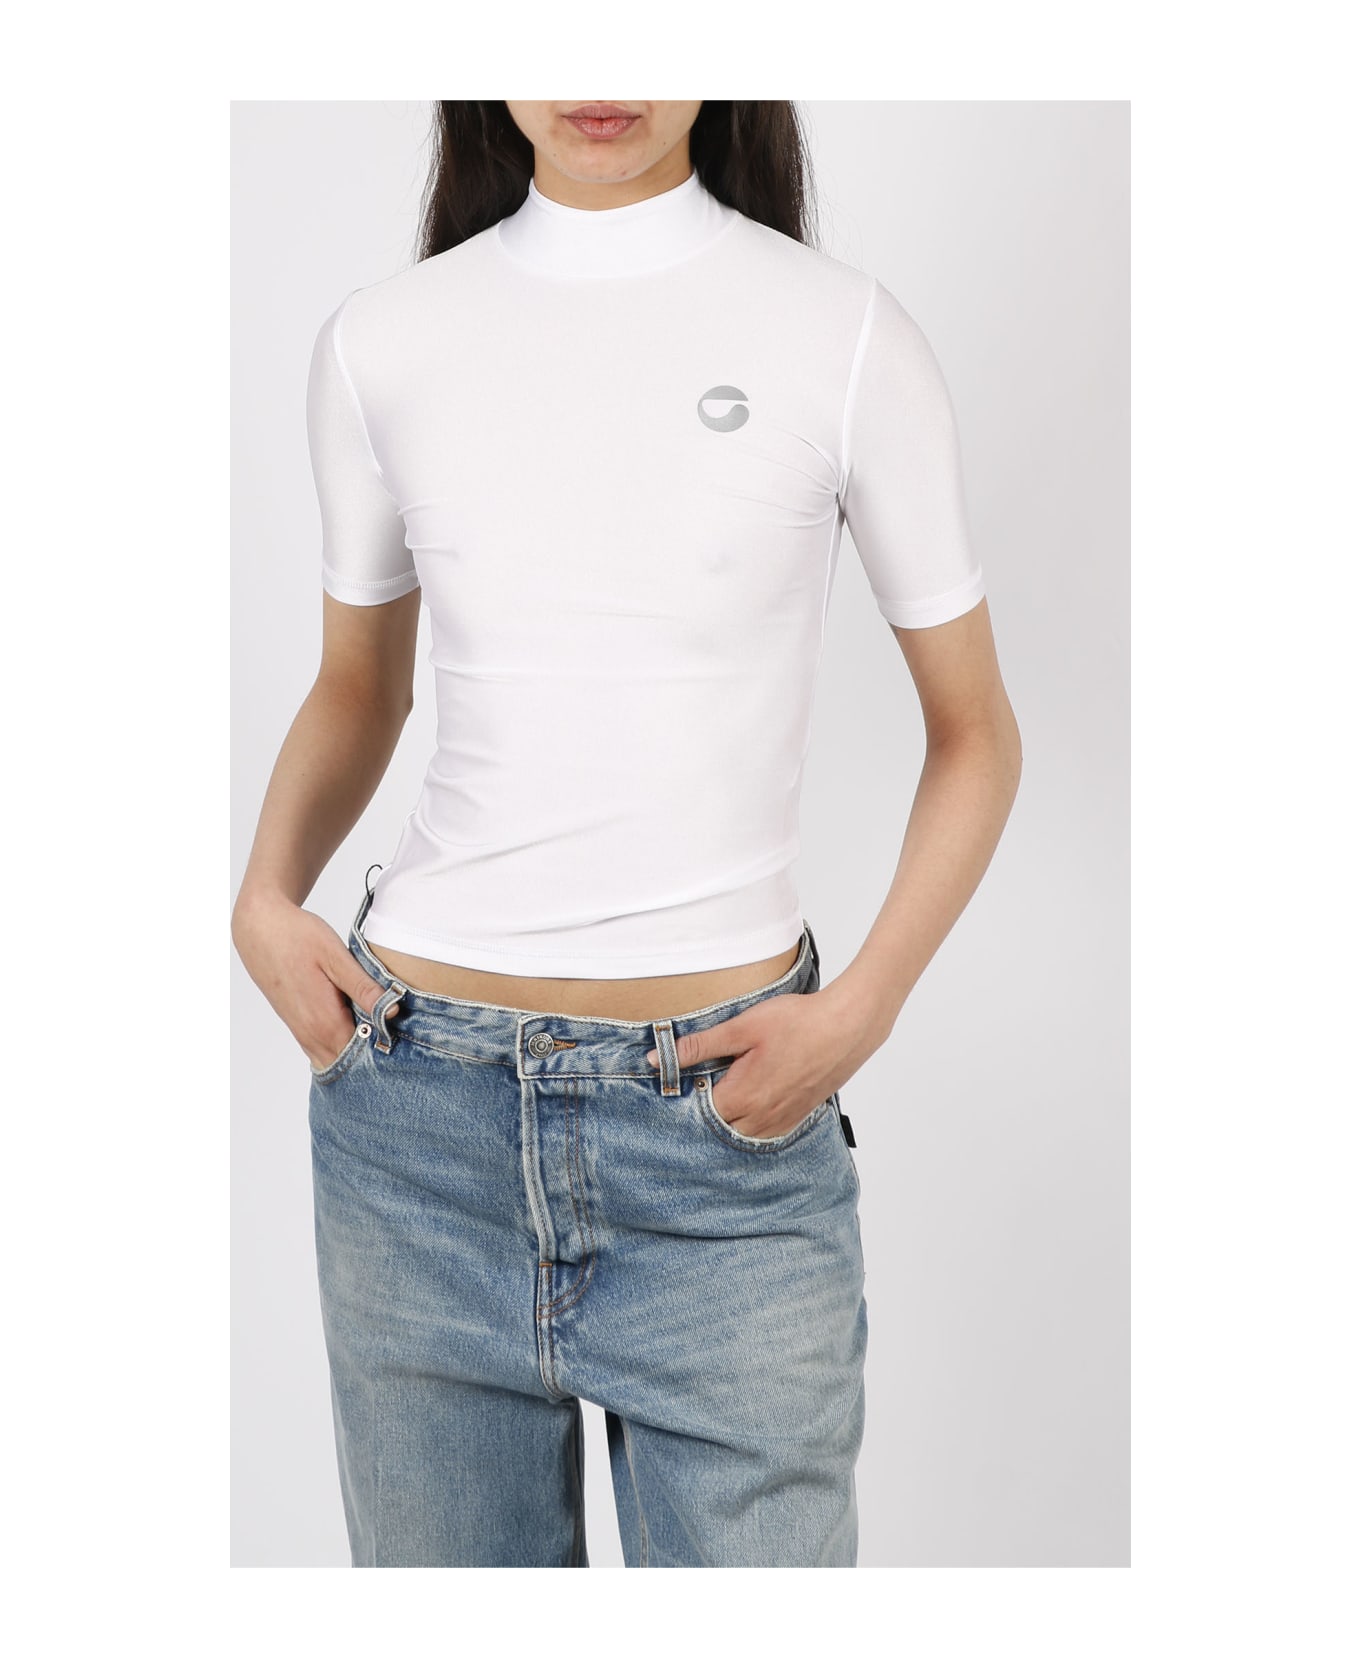 Coperni High Neck Fitted Top - White